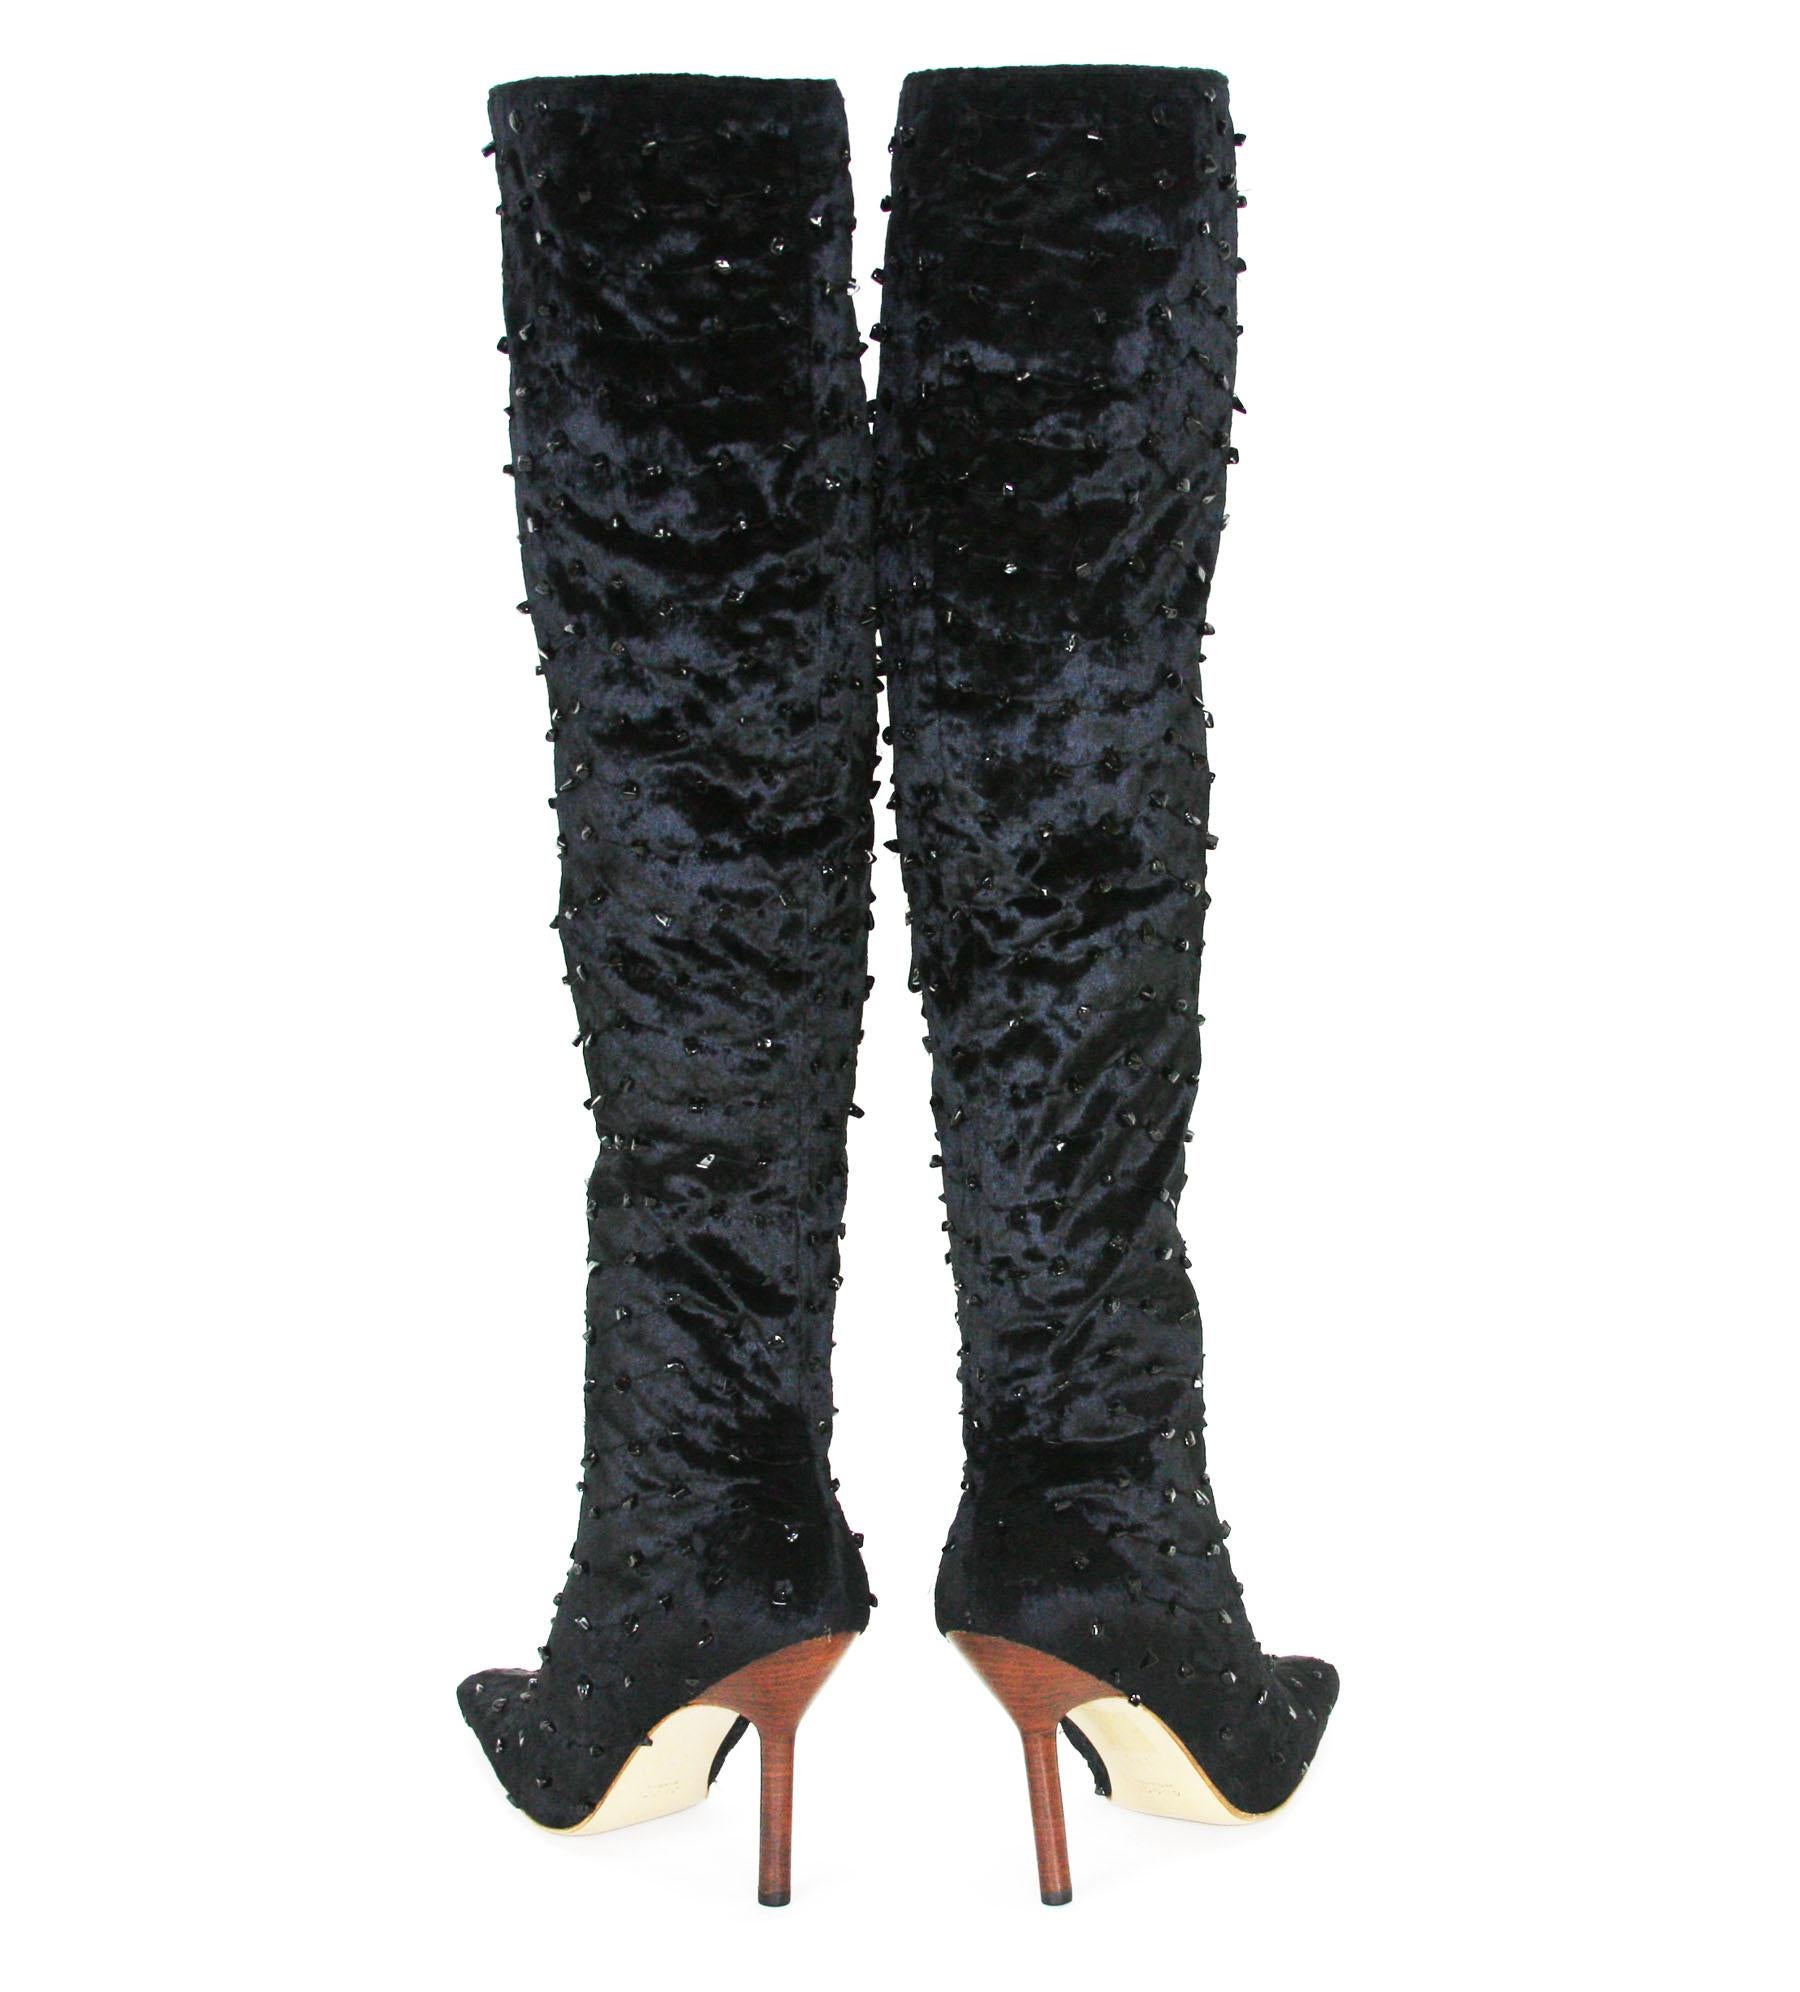 Tom Ford for Gucci Runway Black Velvet Knee Boots
Vintage F/W 1999 Runway Collection
Designer size 37.5 B - US 7.5 
Sexy and Elegant Style, Embellished with Genuine Onyx.
Half way Zip Closure, Pointed Toe, Fully Lined in Soft Black Leather, Leather